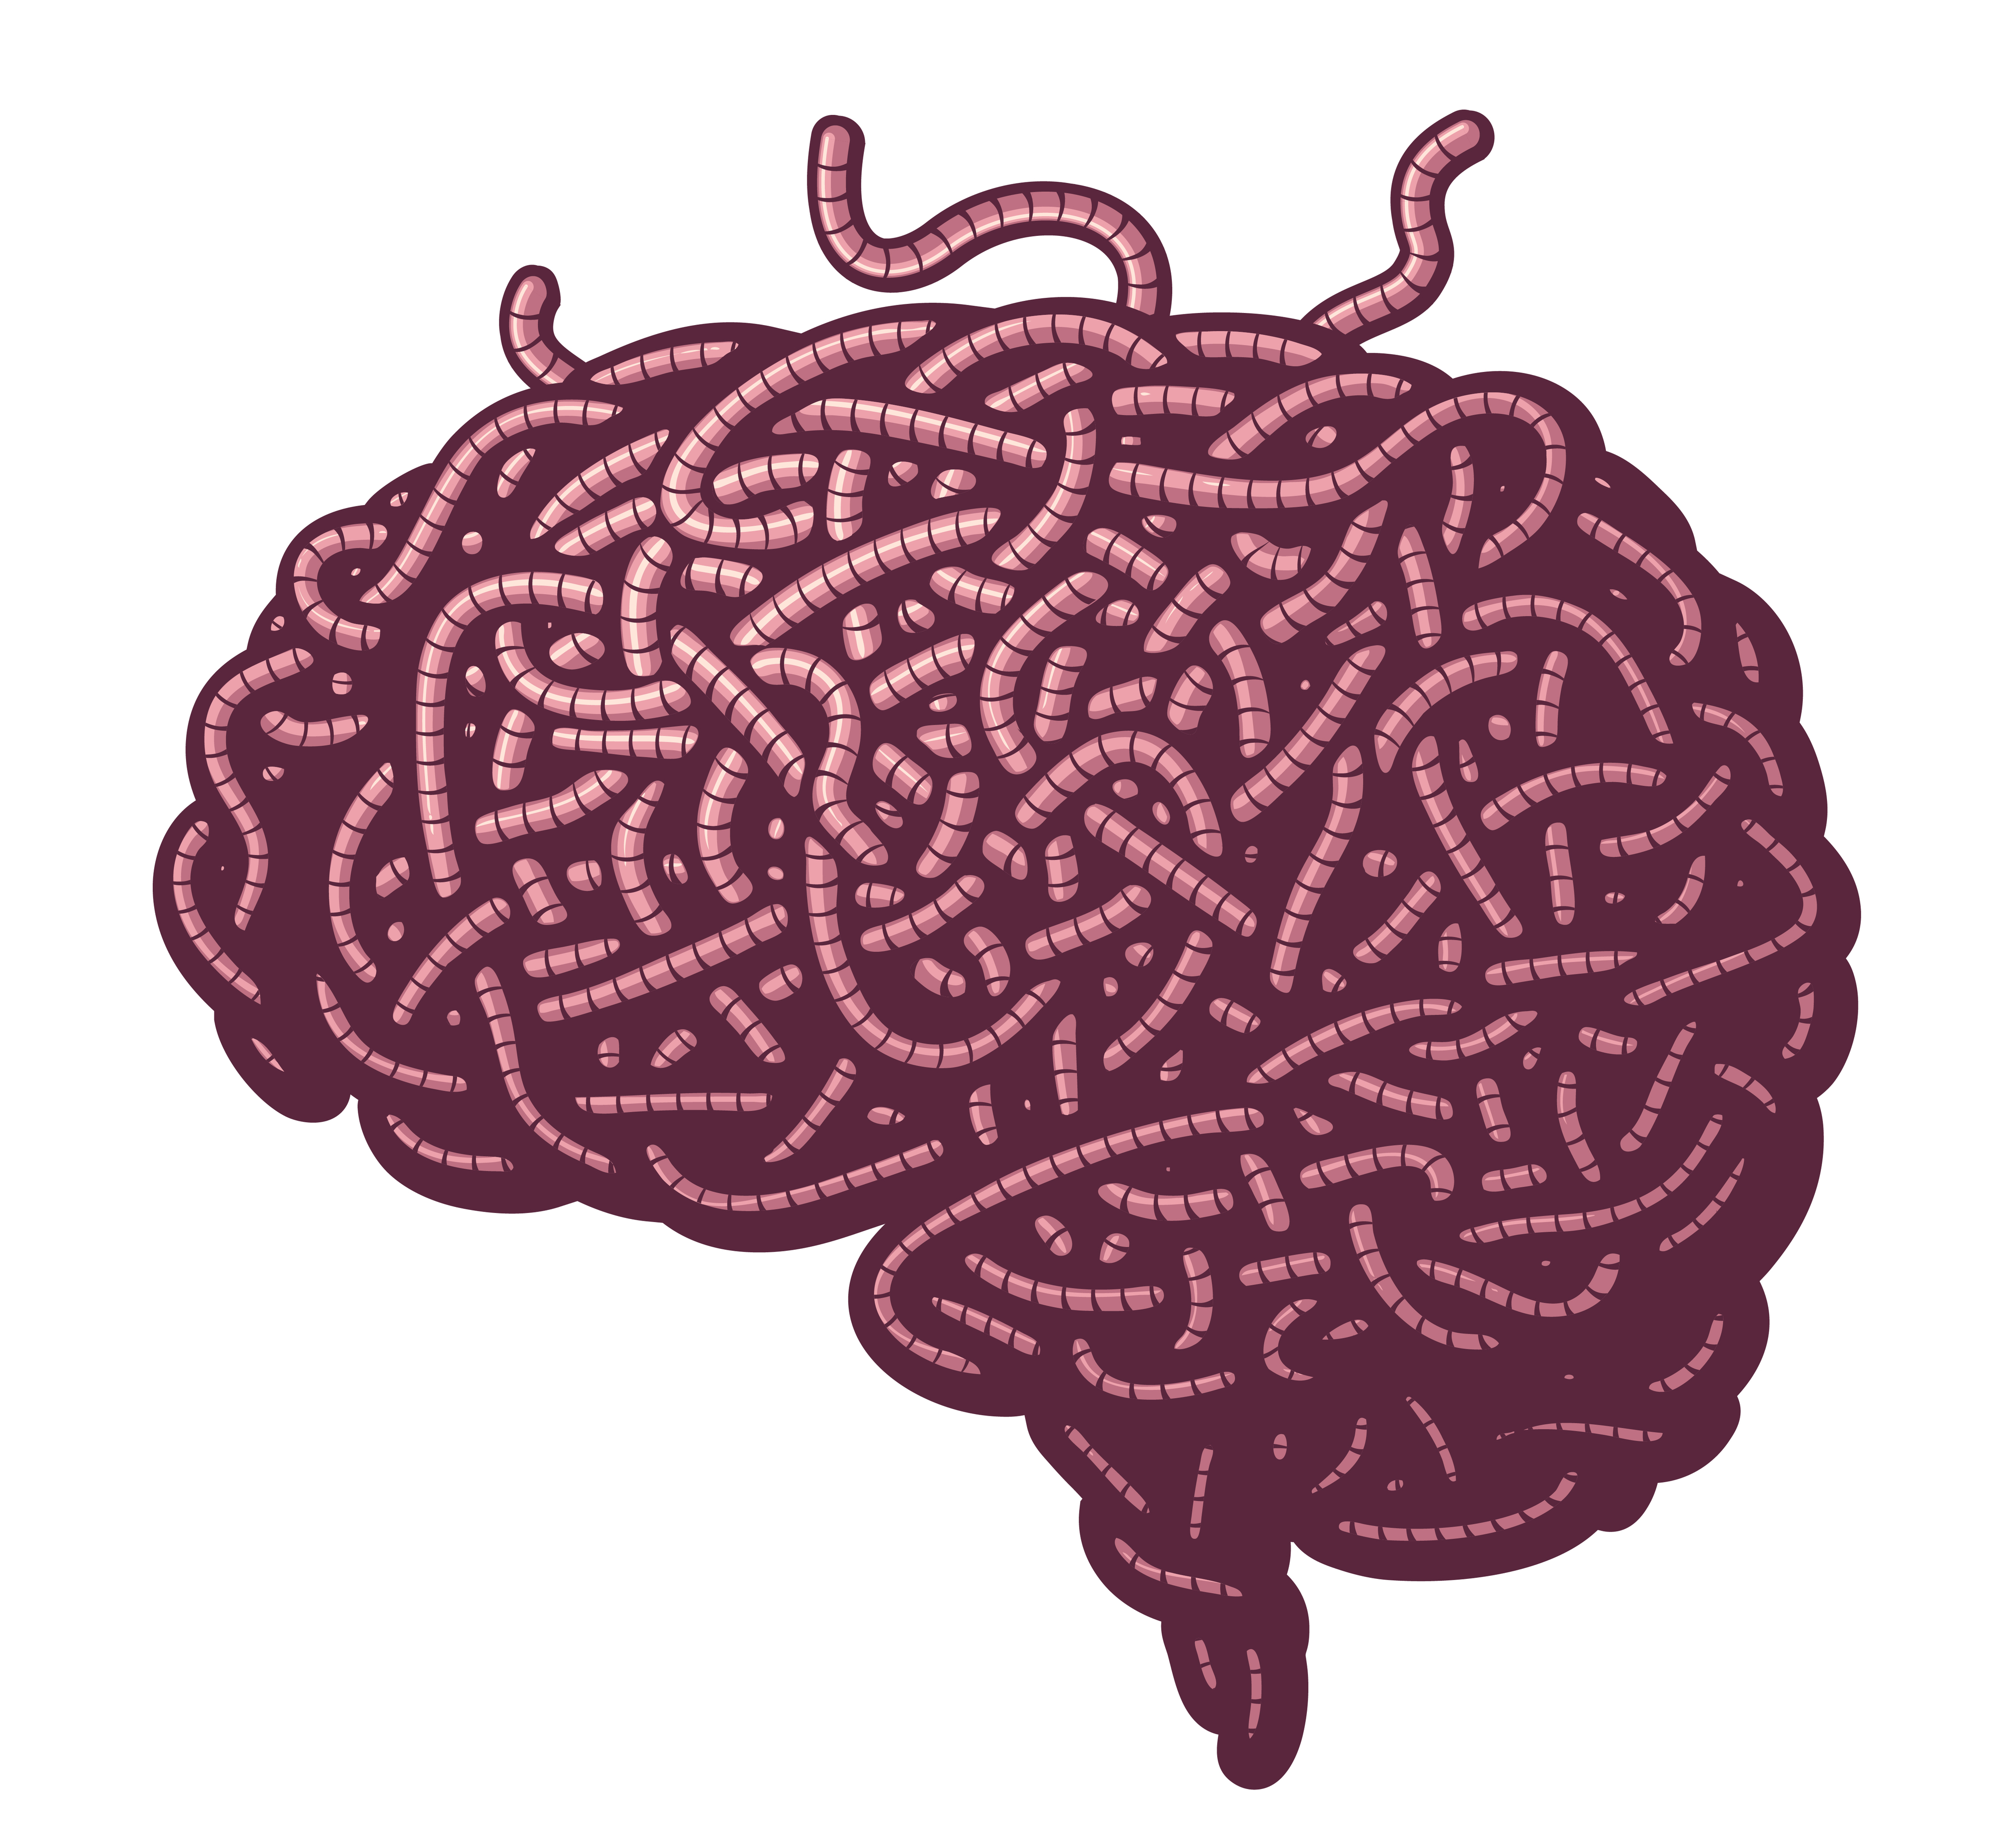 Illustration of a human brain made from intertwined worms